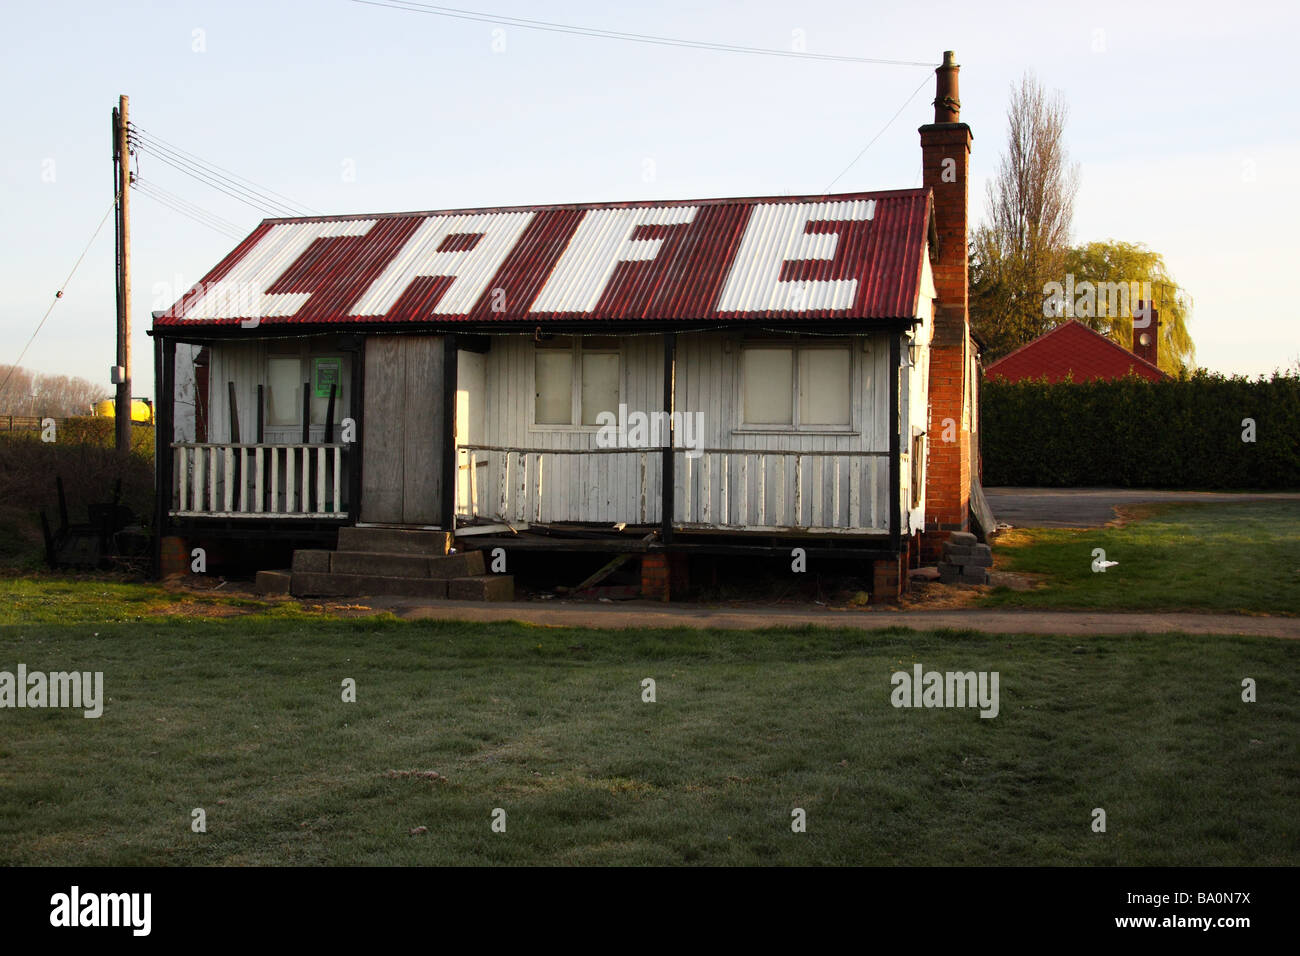 Old style transport Cafe or greasy spoon on the side of the a1 in nottinghamshire Stock Photo